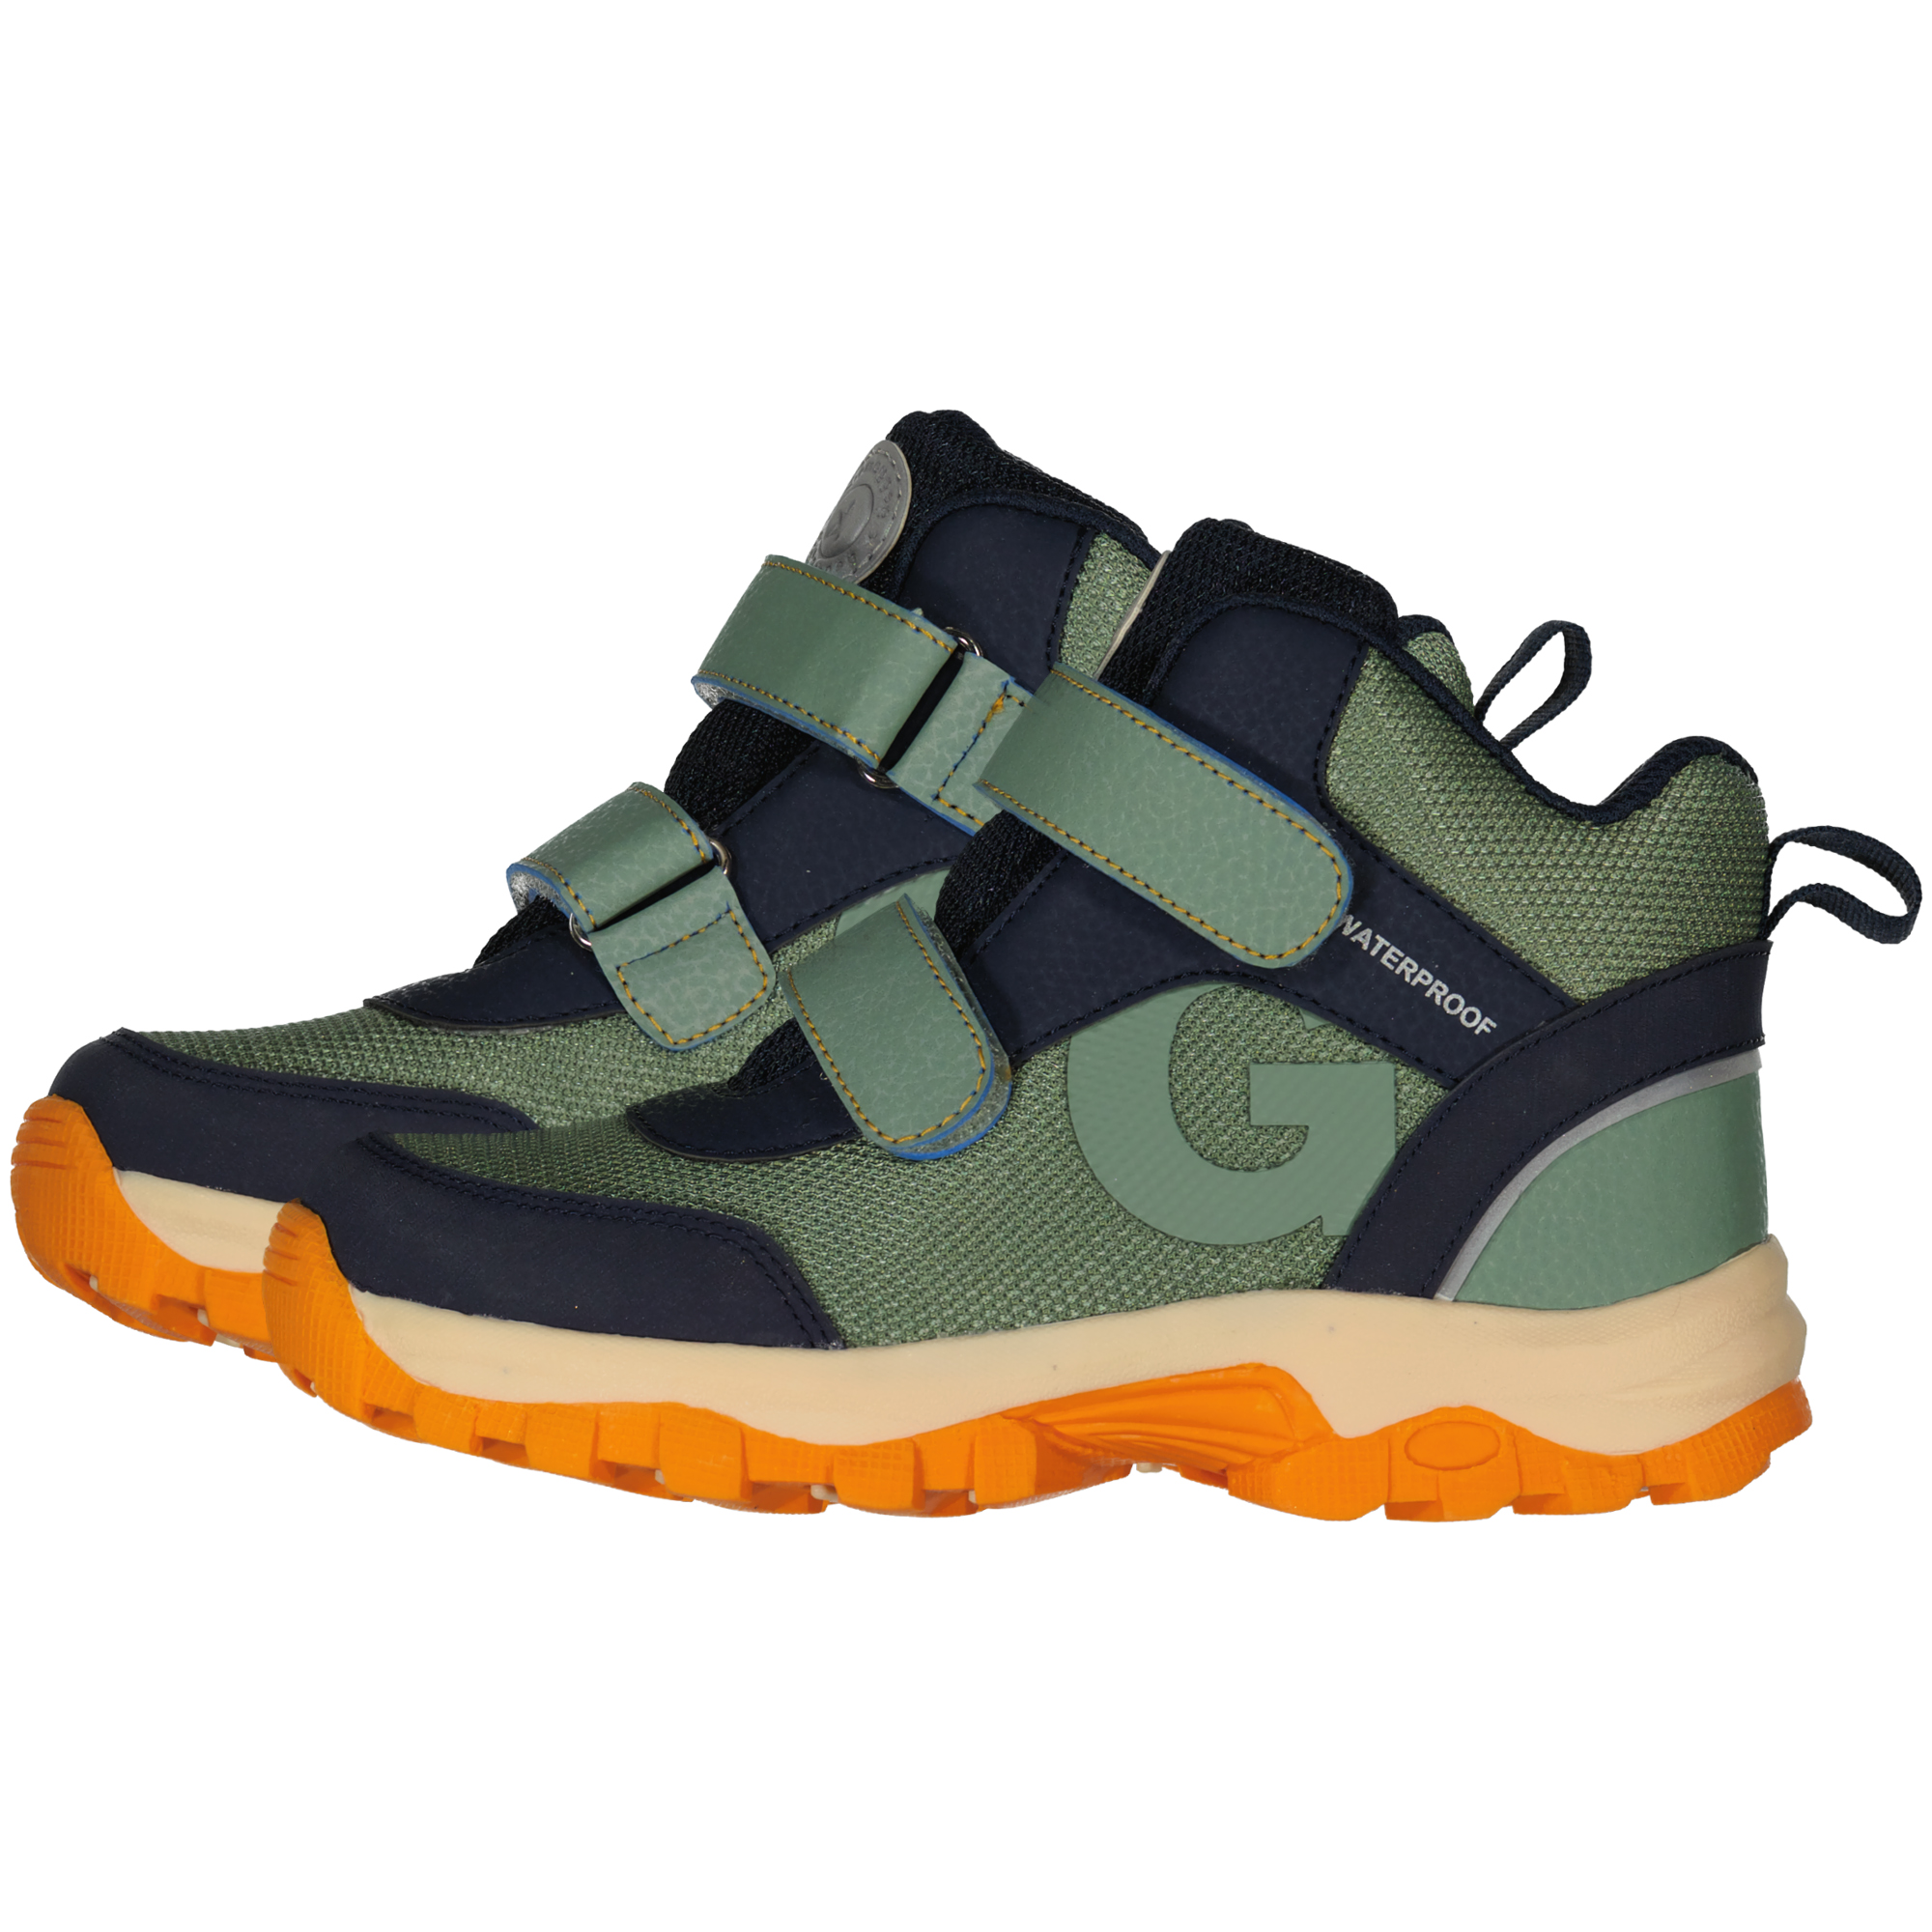 All weather shoes Moss green